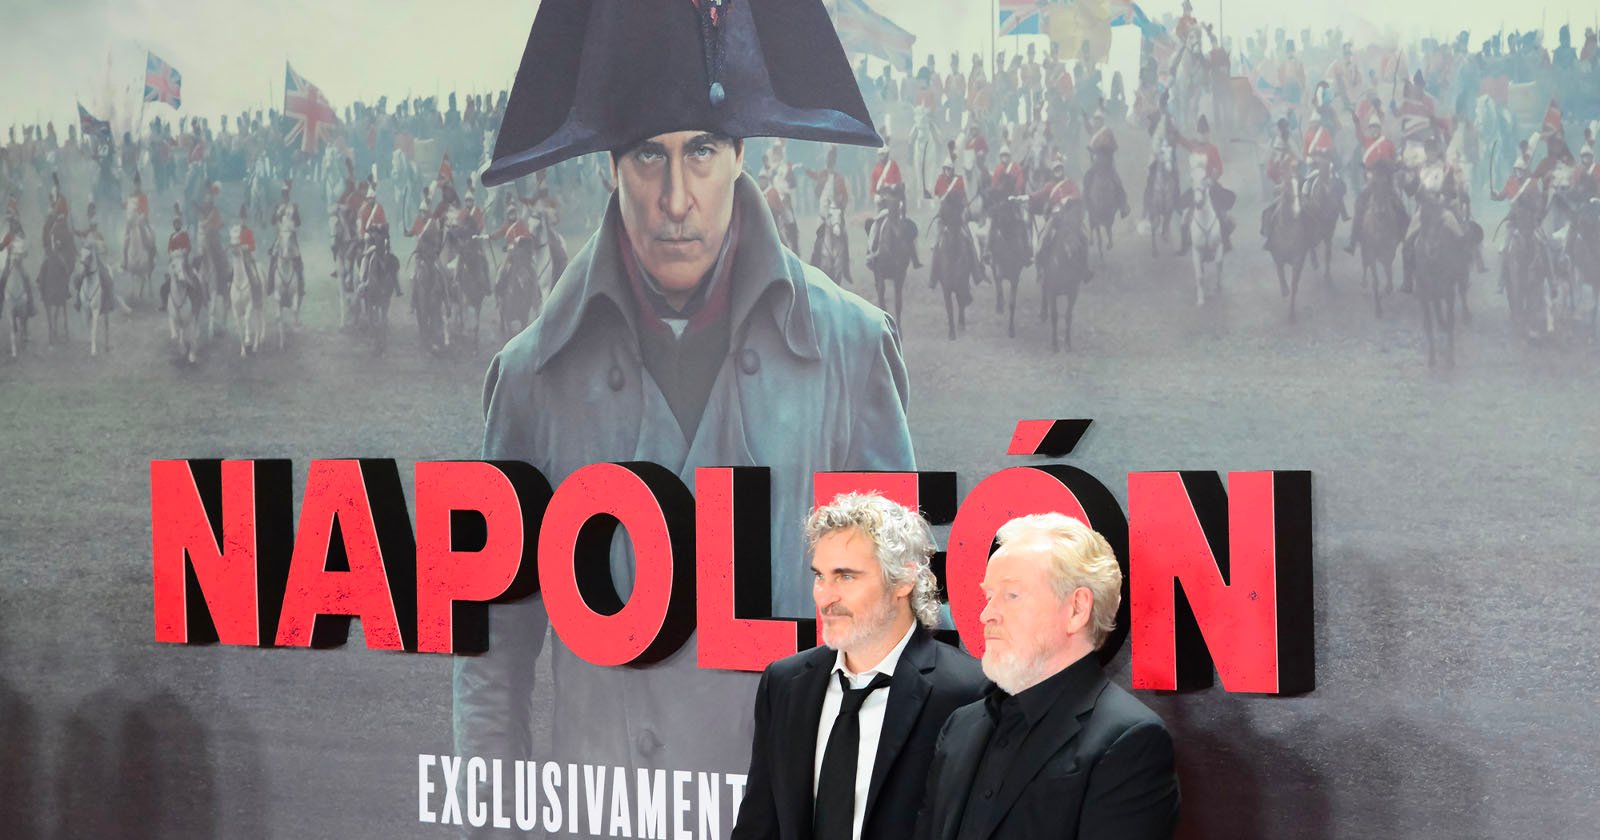  ridley scott used multiple cameras while filming napoleon 